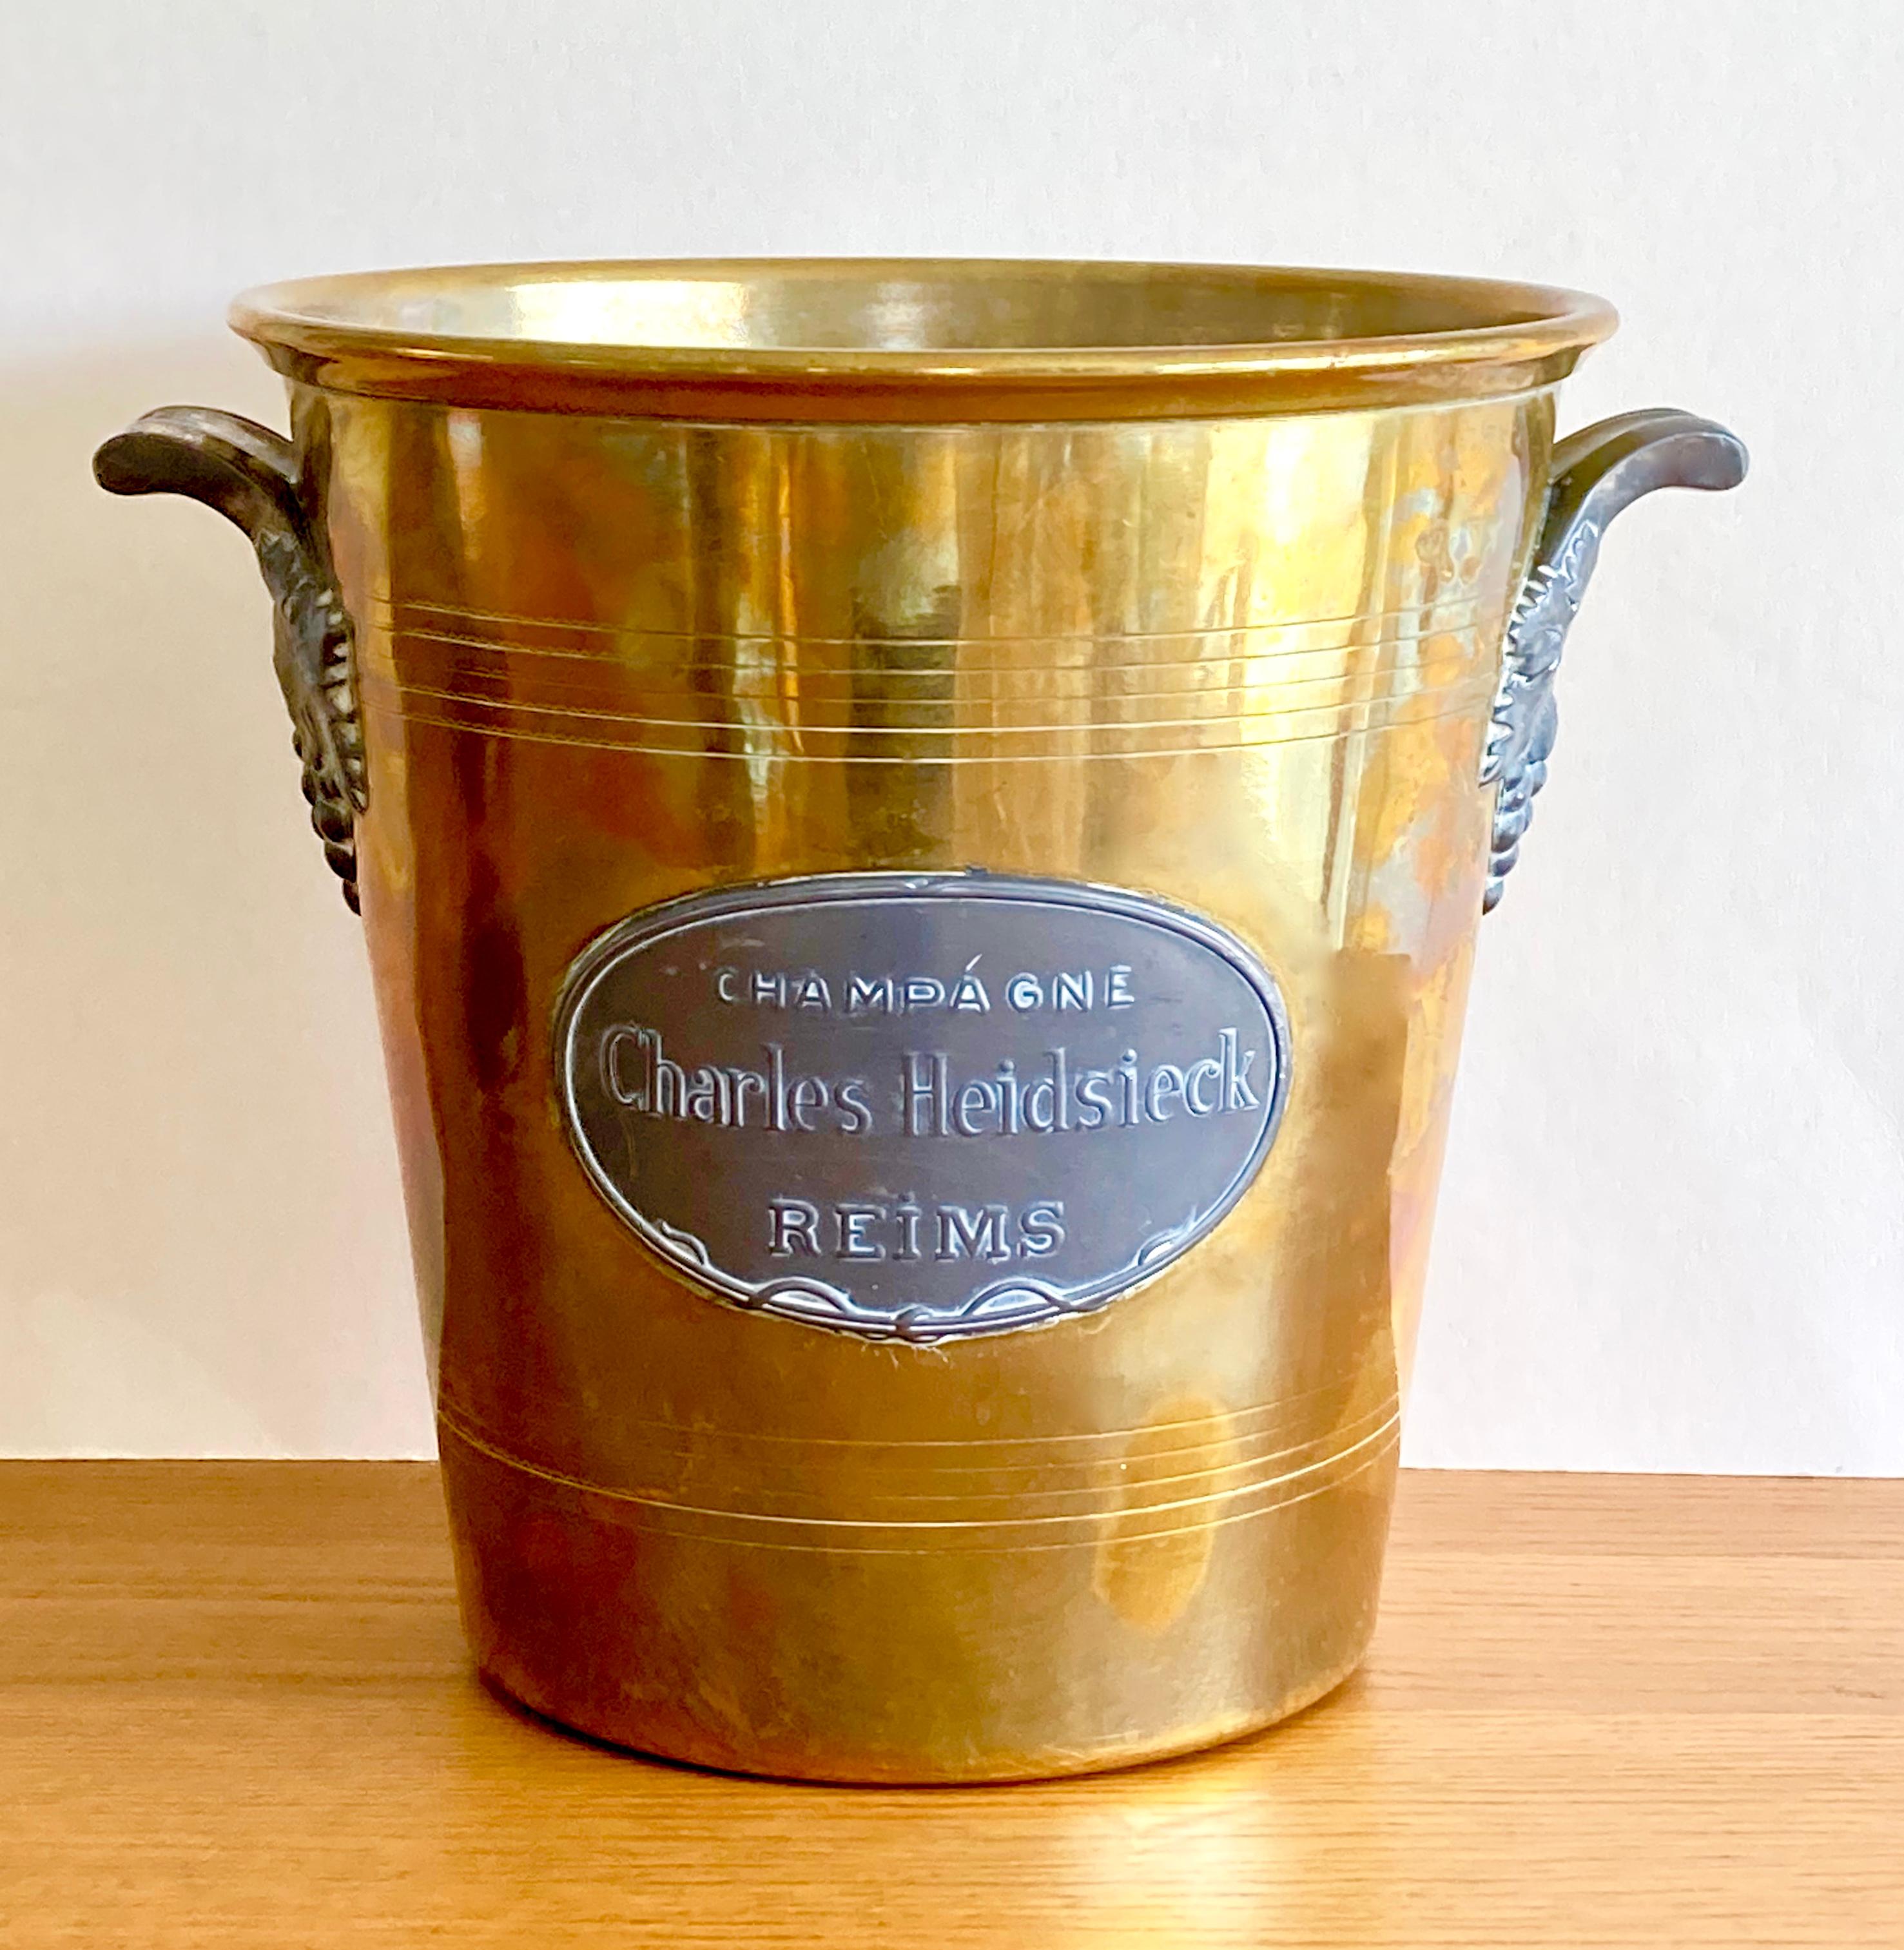 A magnificent, authentic, art nouveau champagne bucket from the famous French champagne maker Charles Heidsieck in Reims, founded in 1851. This rare model dates from the early 1900s. It is made in France for Charles Heidsieck by Argit SFOA (Société